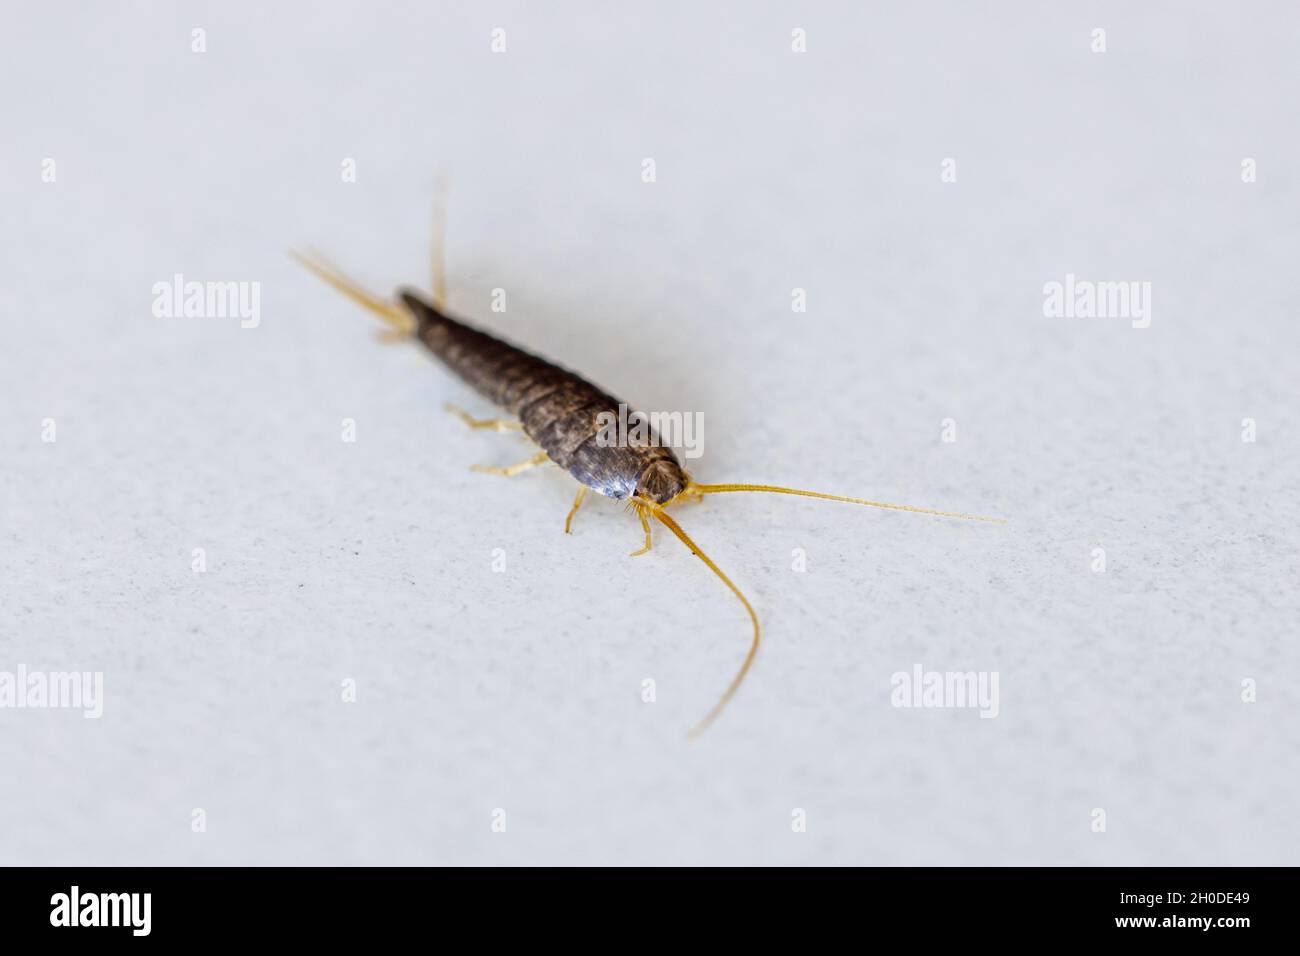 A silverfish or bookworm on a white background Stock Photo